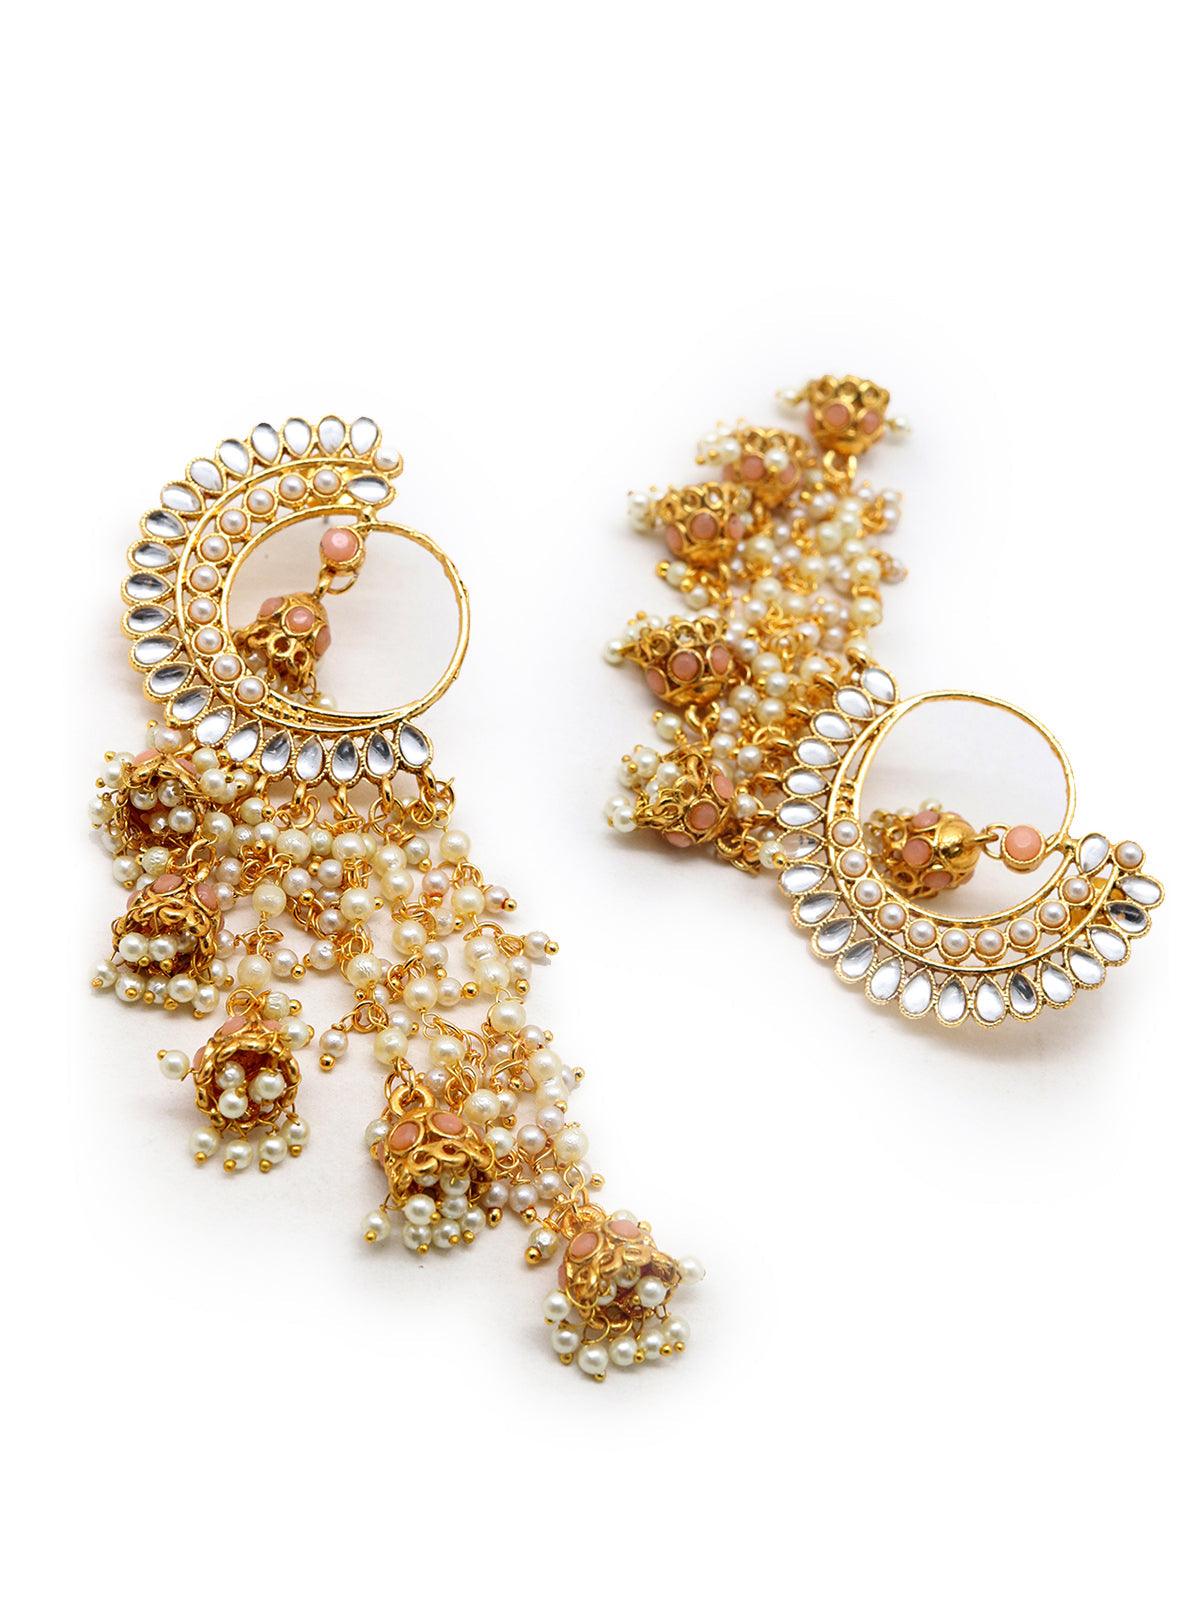 Women's Round And Half- Moon Ornate Kundan-Pearl Peach Earrings With Jhumkas - Odette